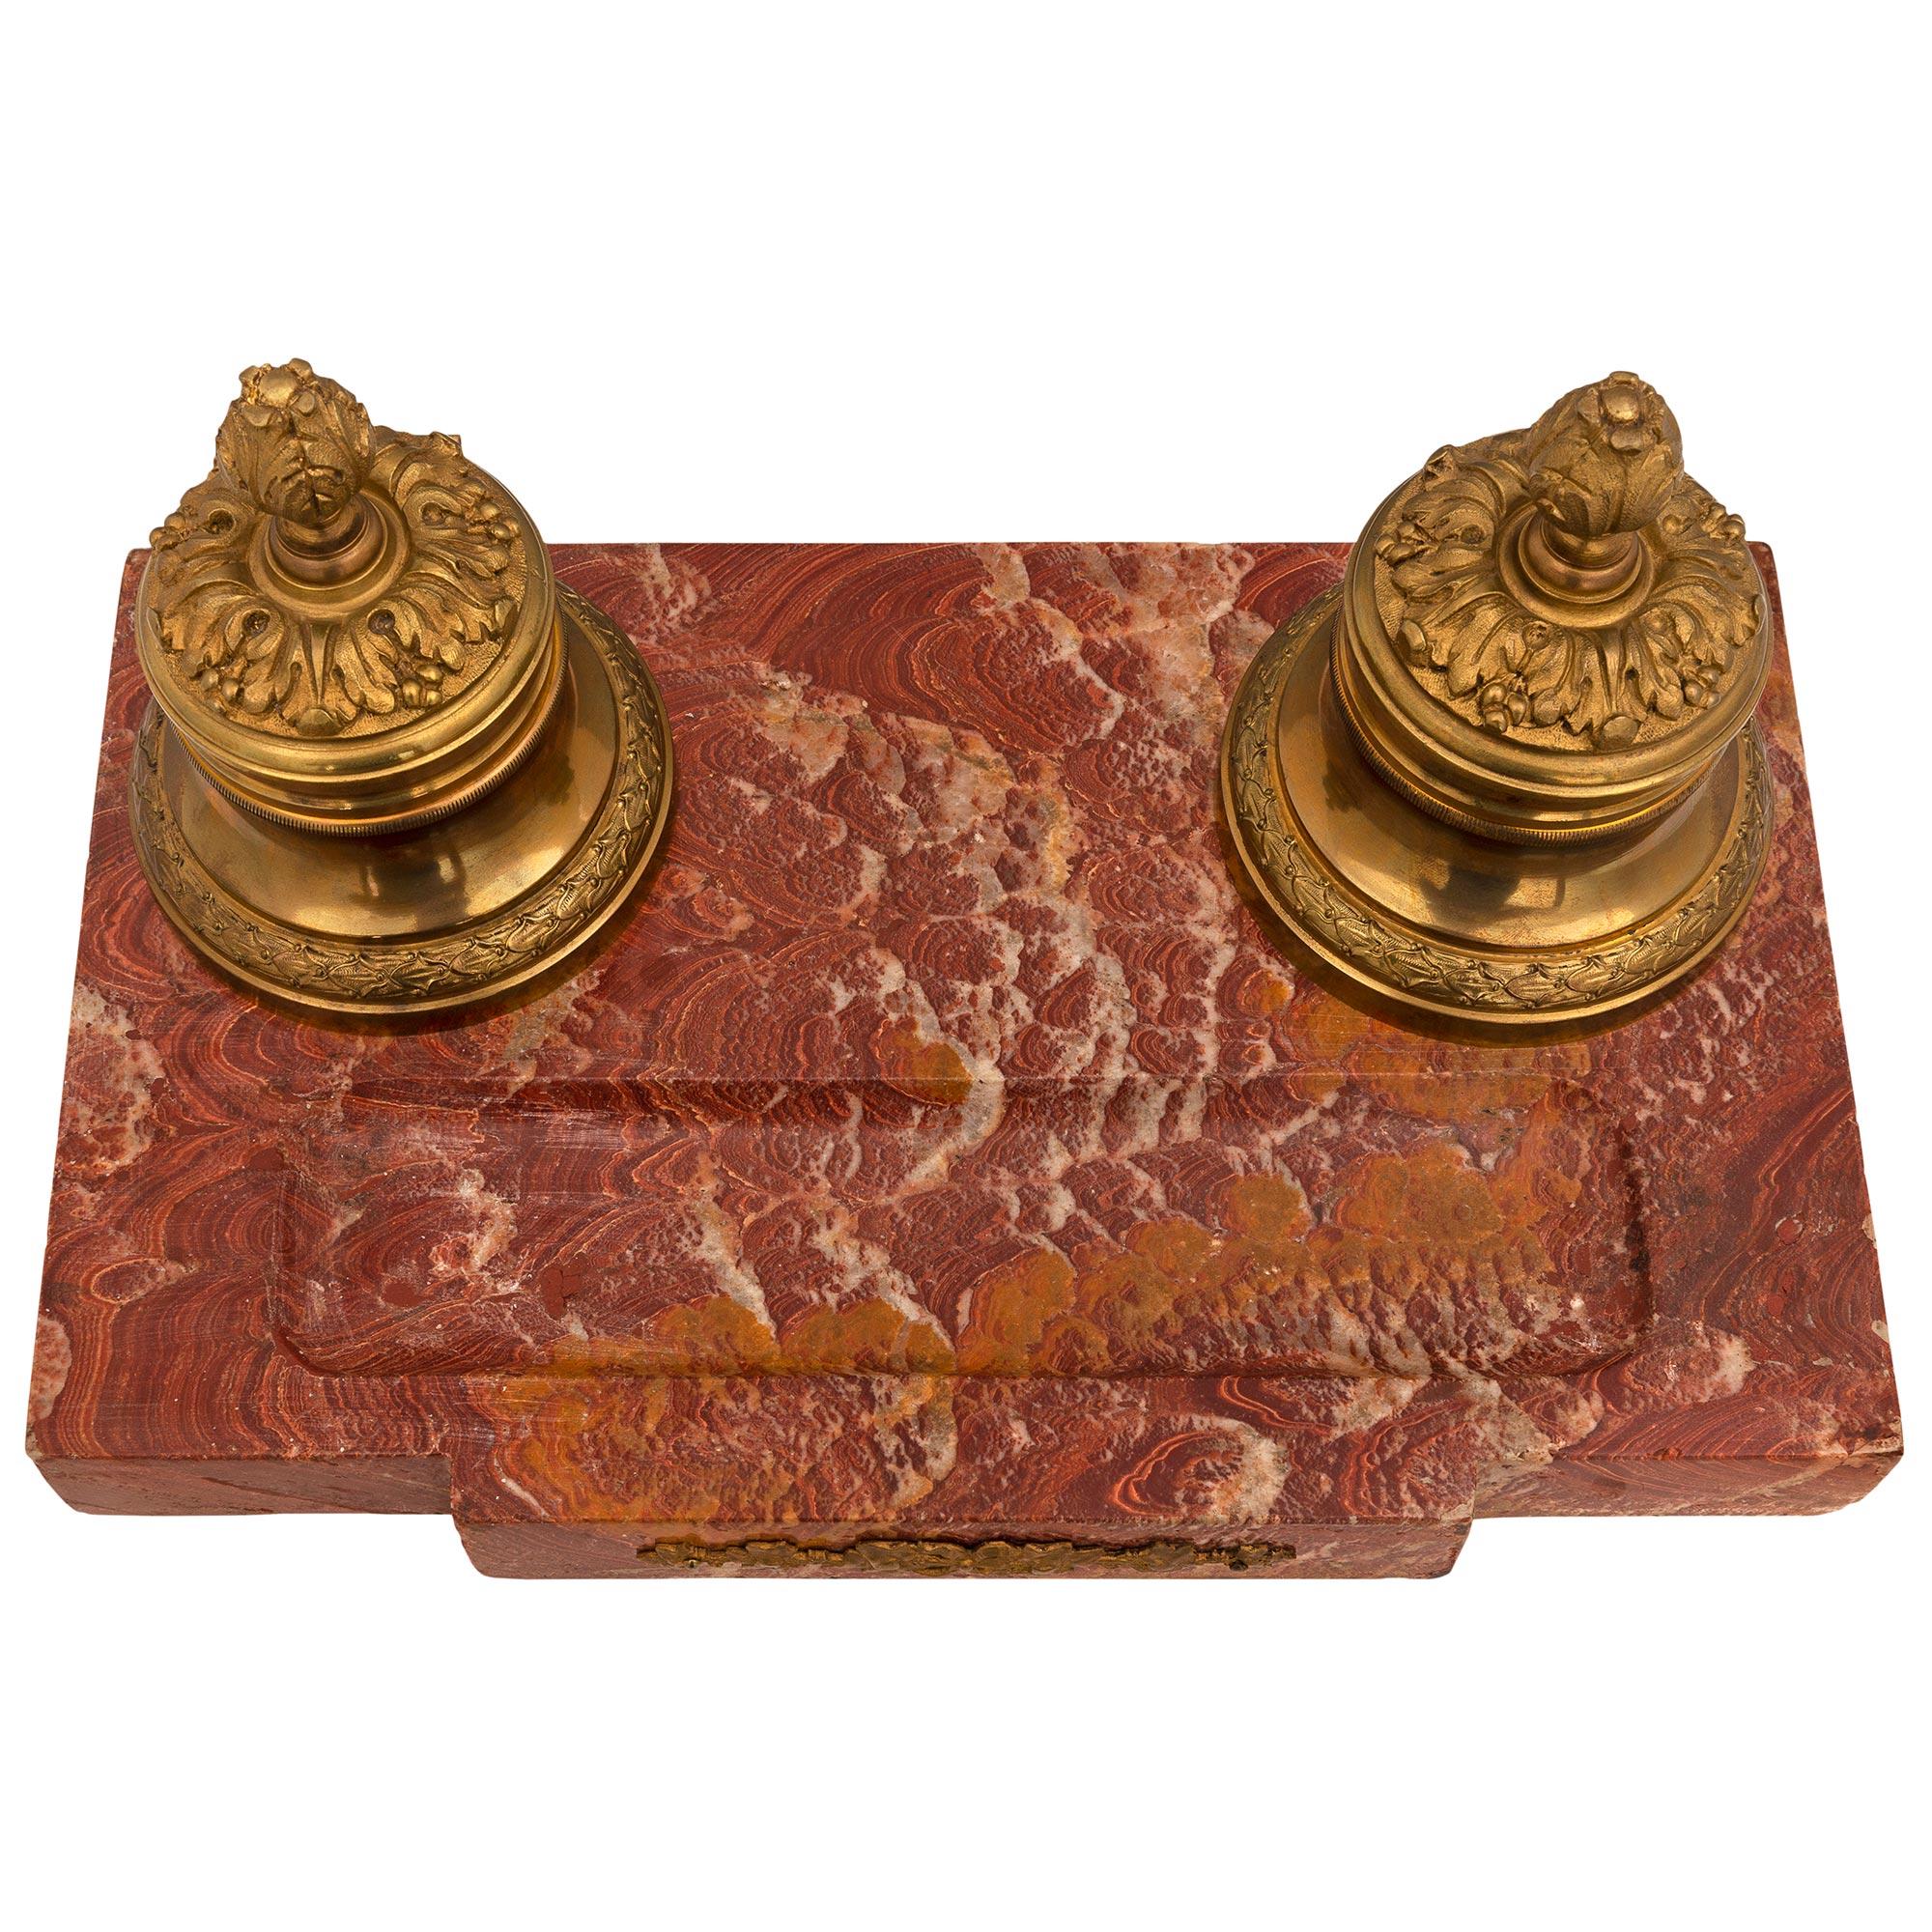 A striking French 19th century Louis XVI st. Alabastro marble and ormolu inkwell. The inkwell is raised by elegant topie shaped ormolu feet below the beautiful Alabastro marble support showcasing the most decorative grain and displaying a sculpted